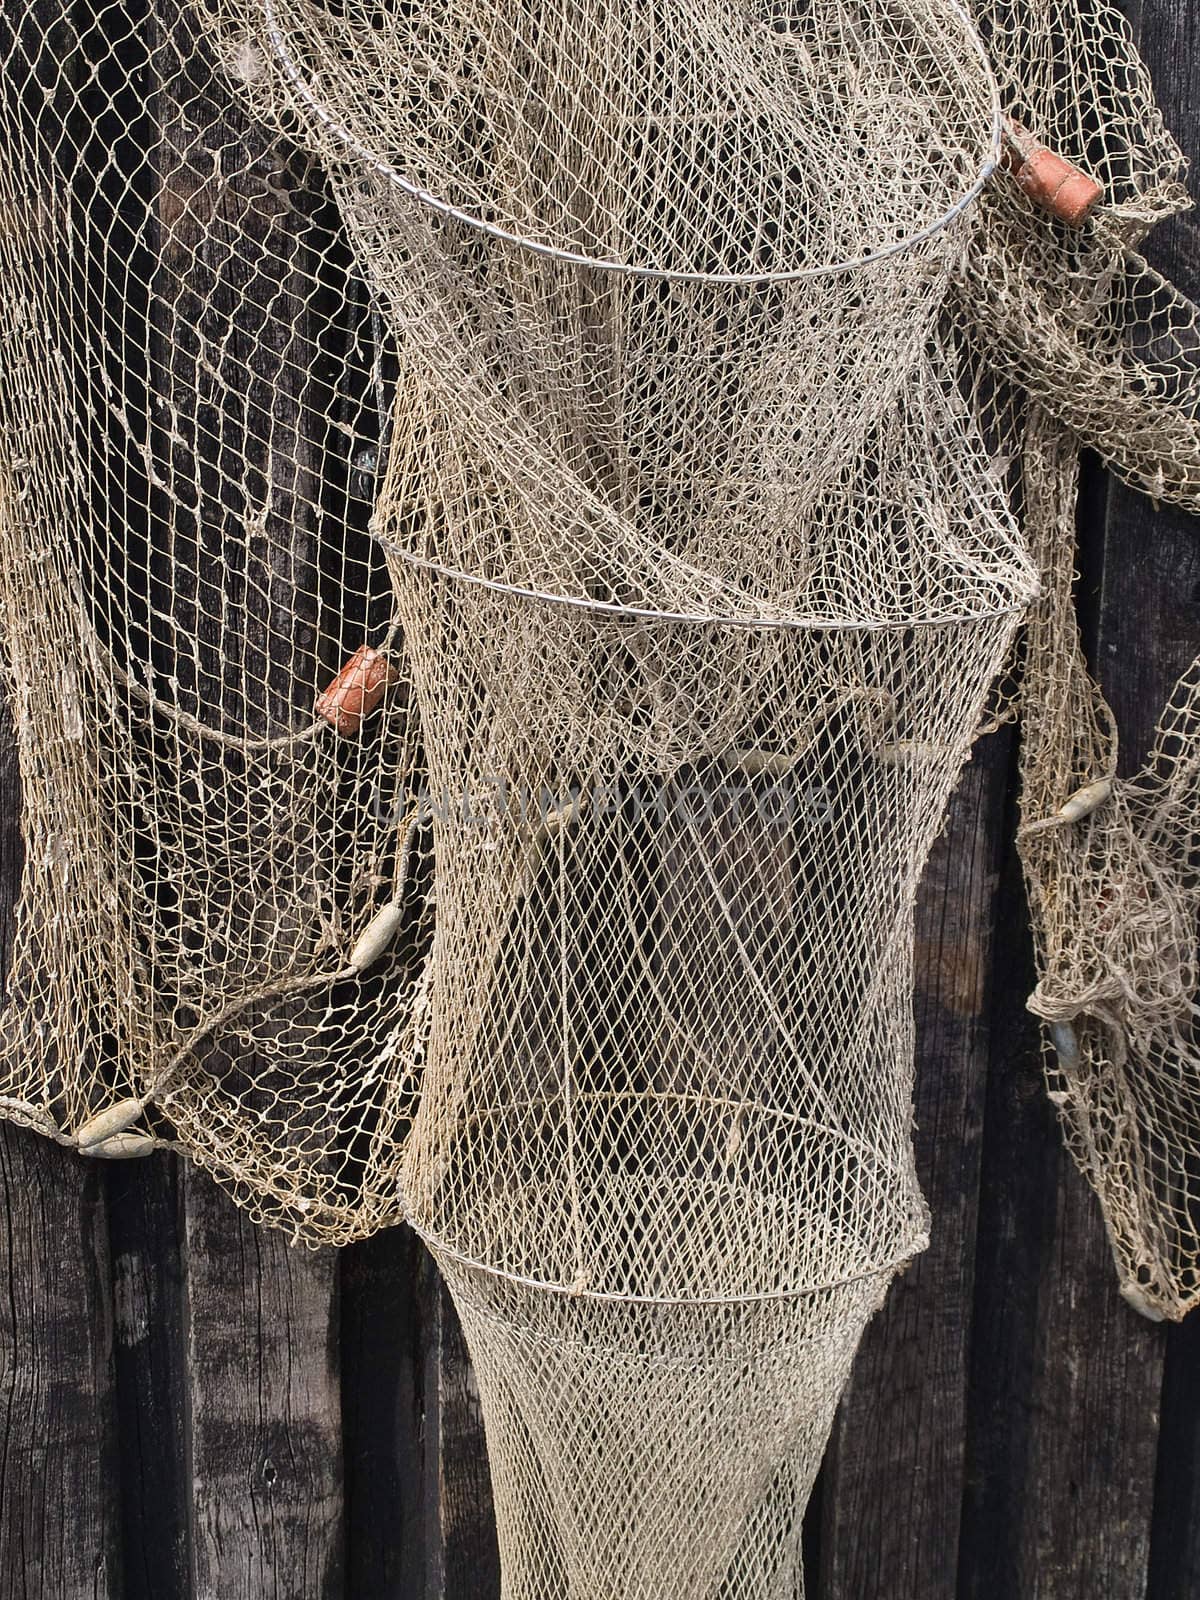 Fishing nets traps hanged on a wooden fence